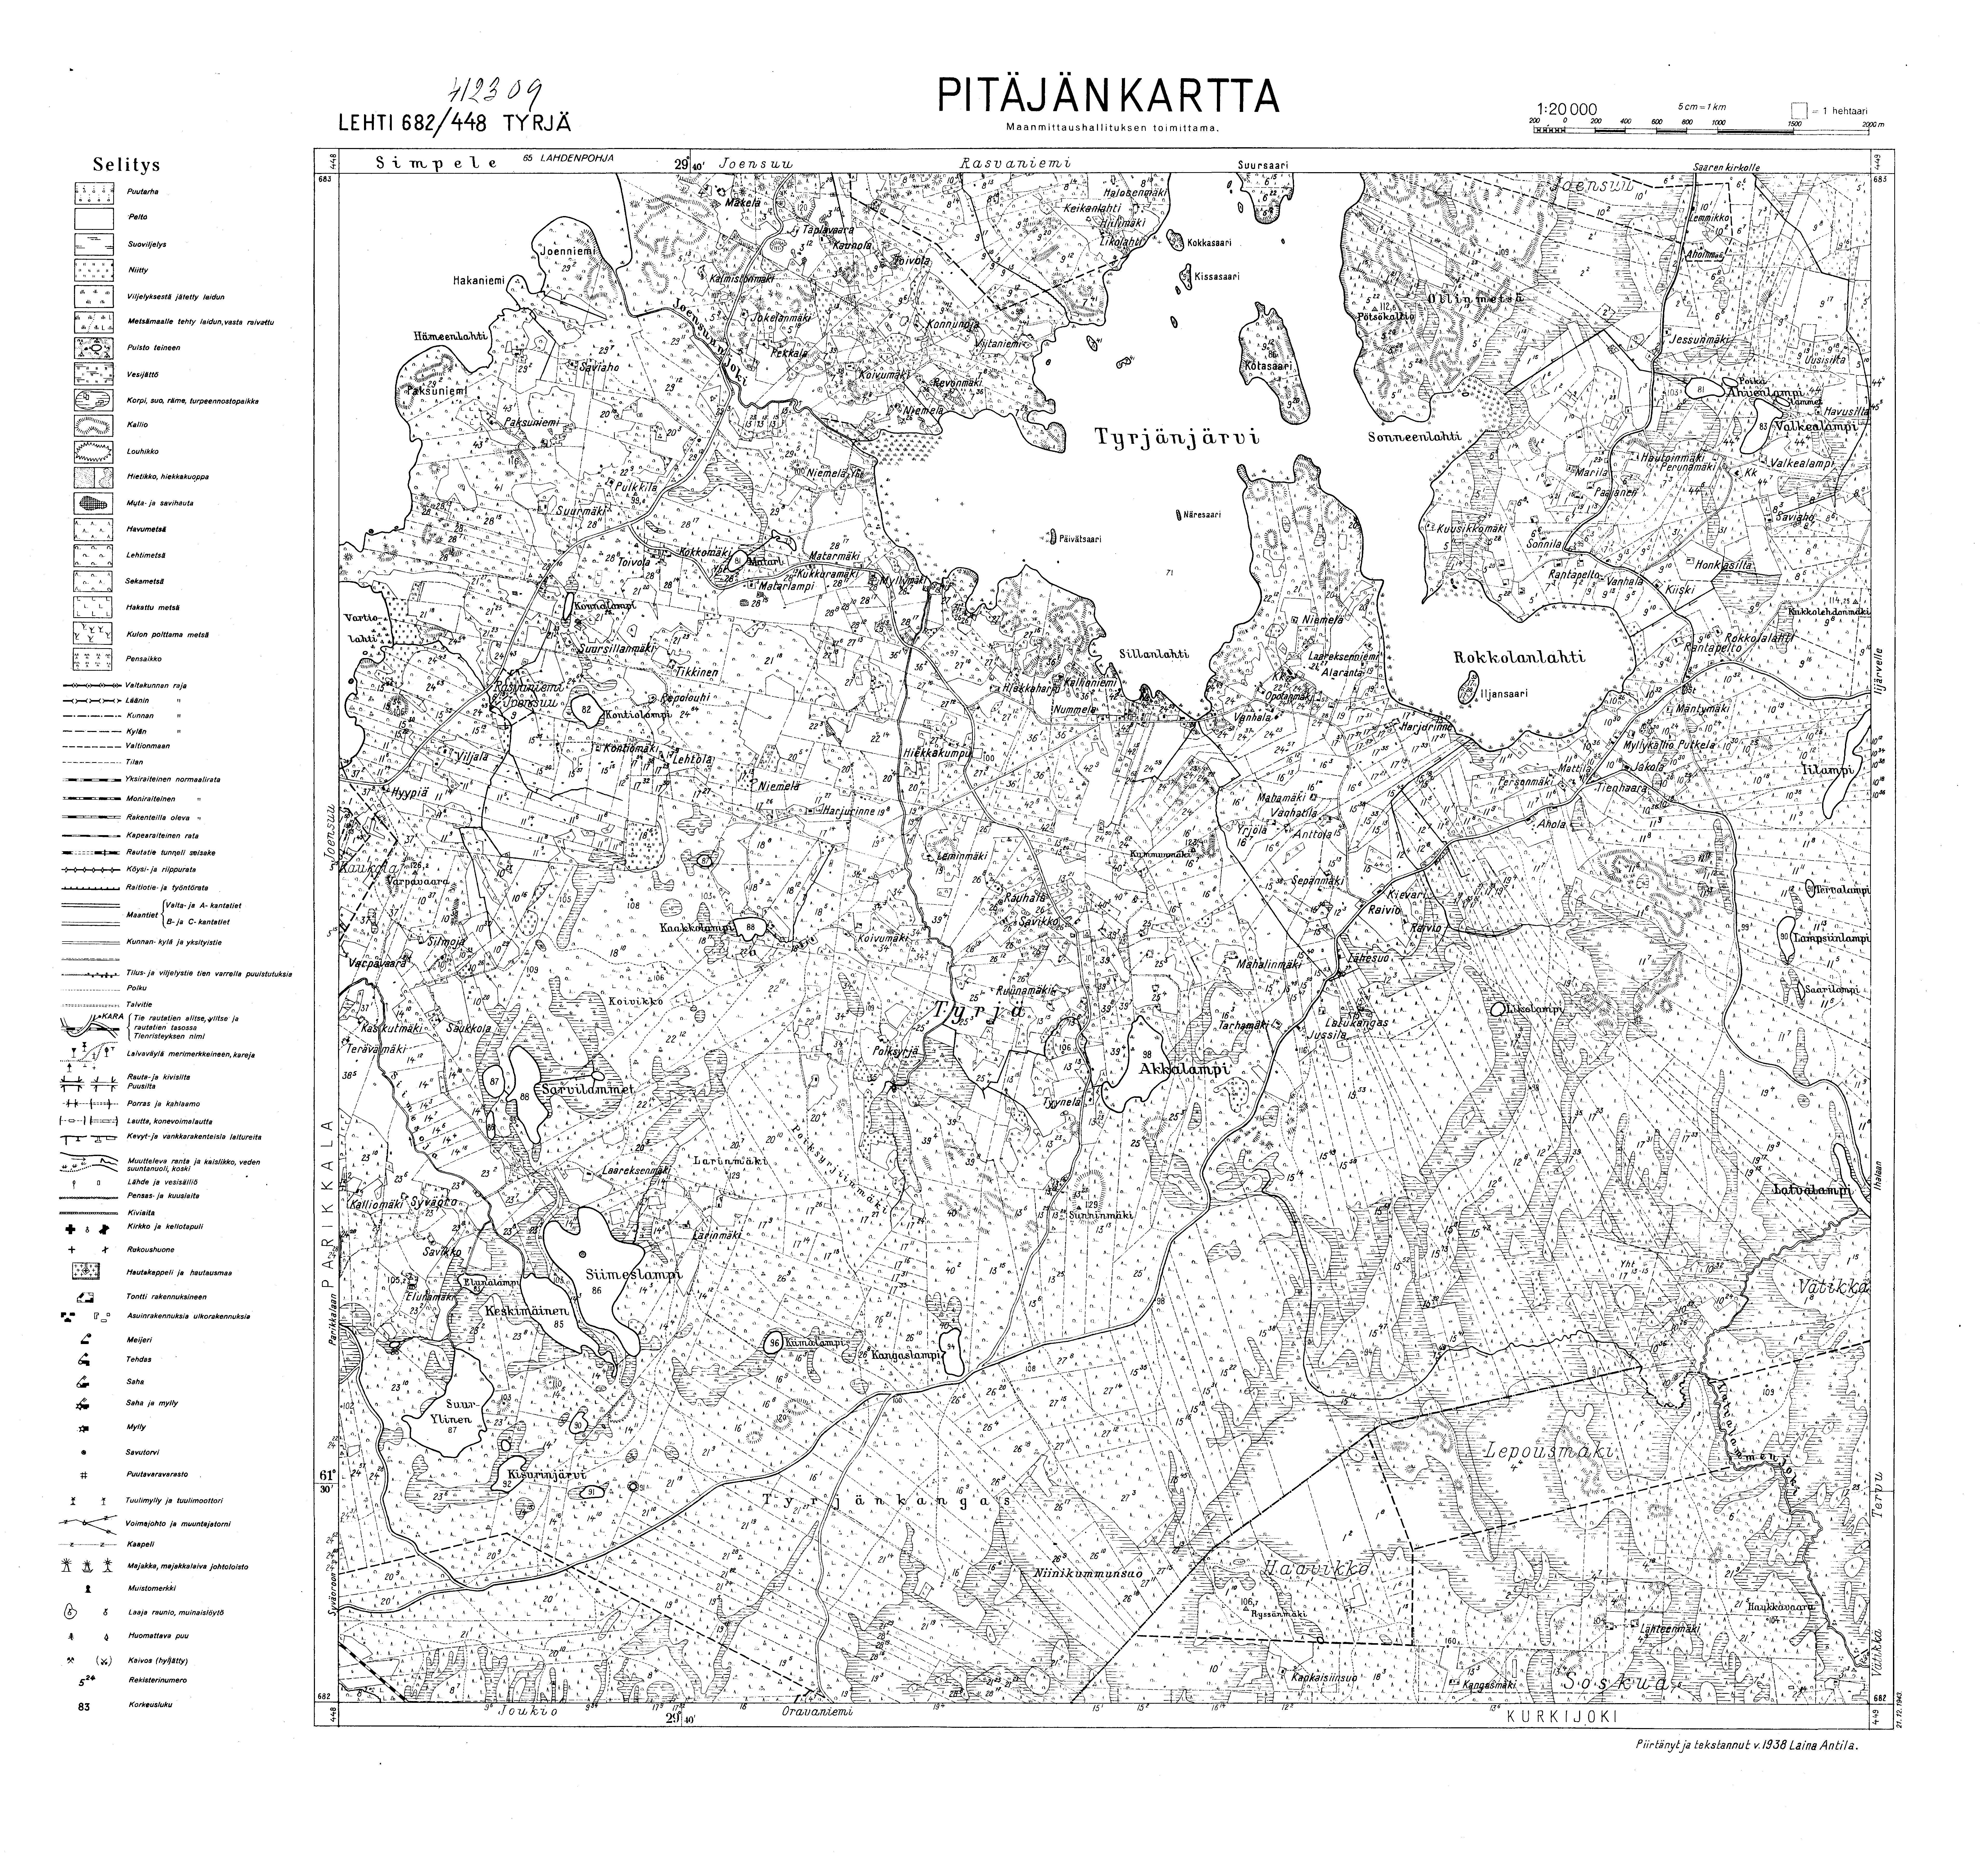 Tyrjä. Pitäjänkartta 412309. Parish map from 1938. Use the zooming tool to explore in higher level of detail. Obtain as a quality print or high resolution image